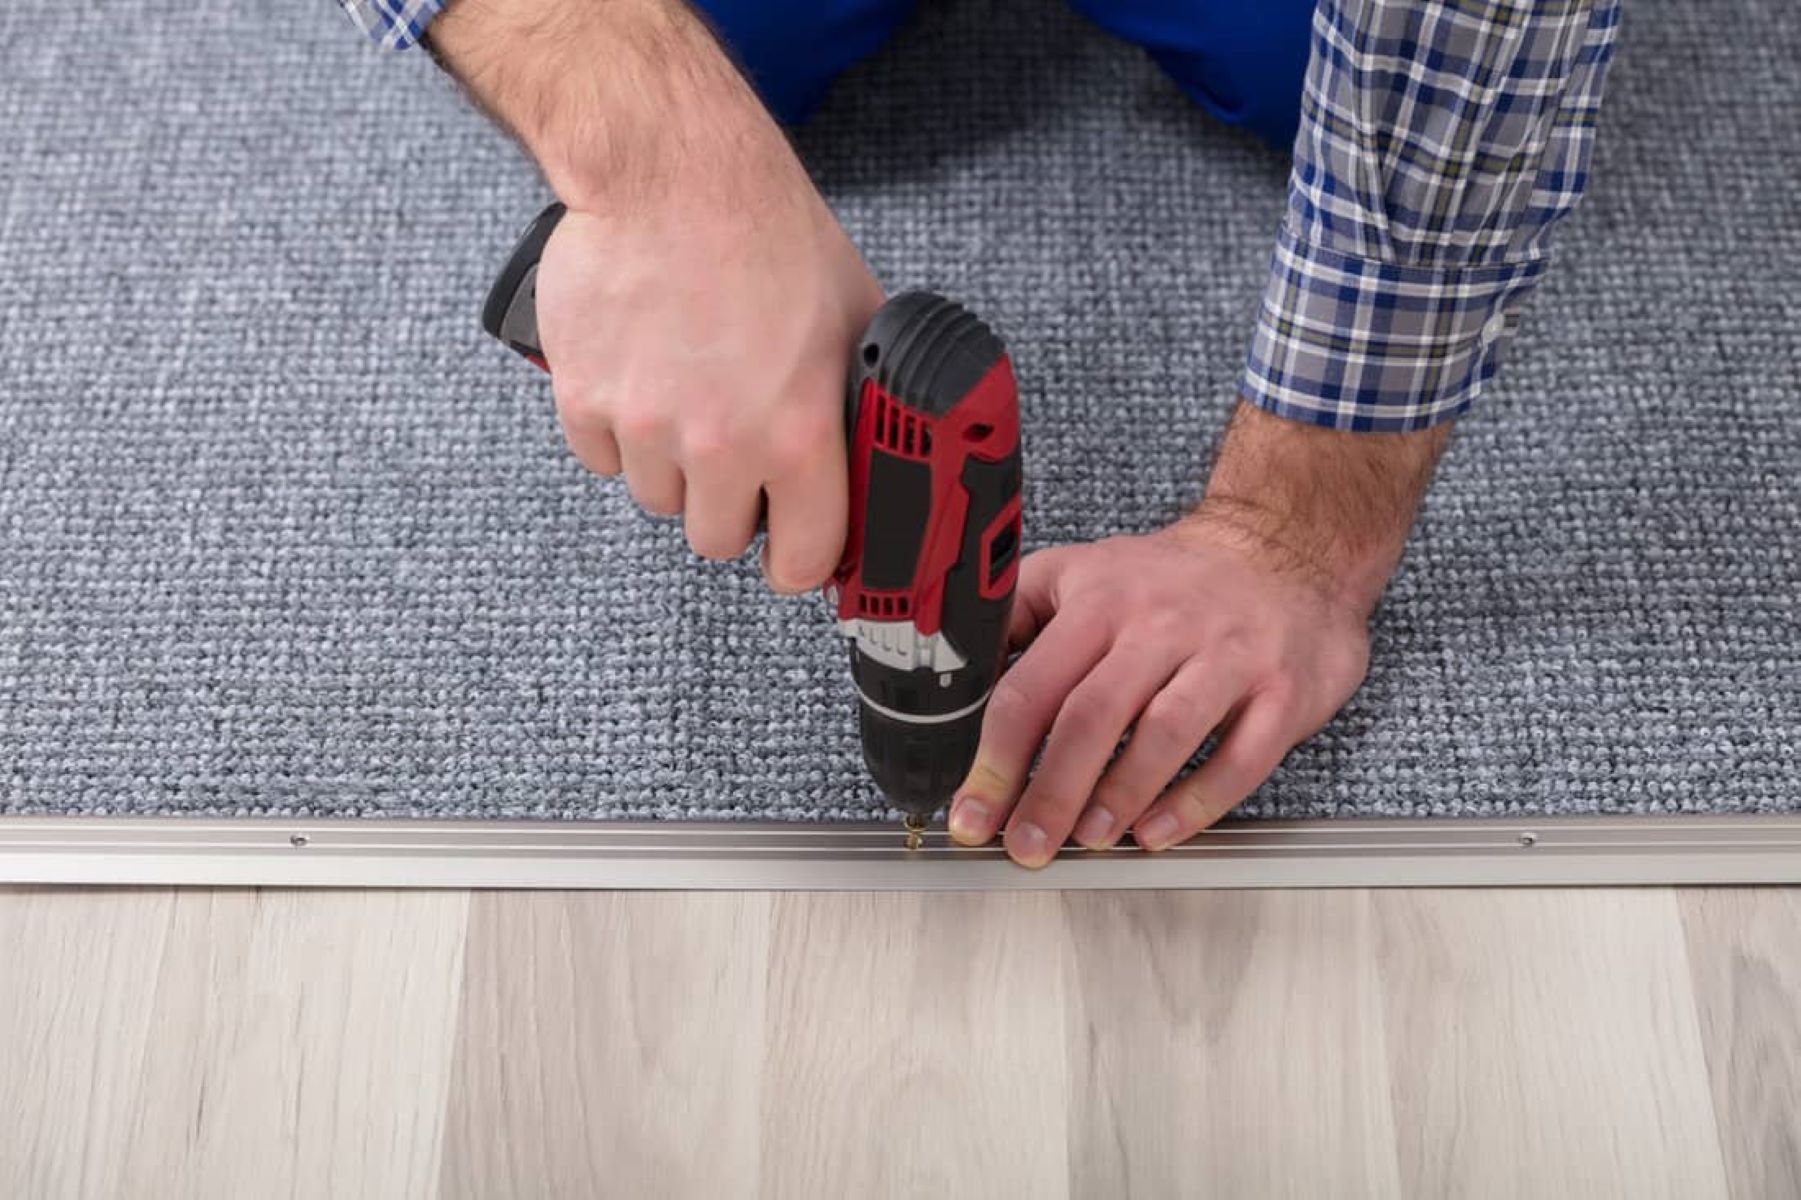 How To Bind Carpet Edges As A DIY Project